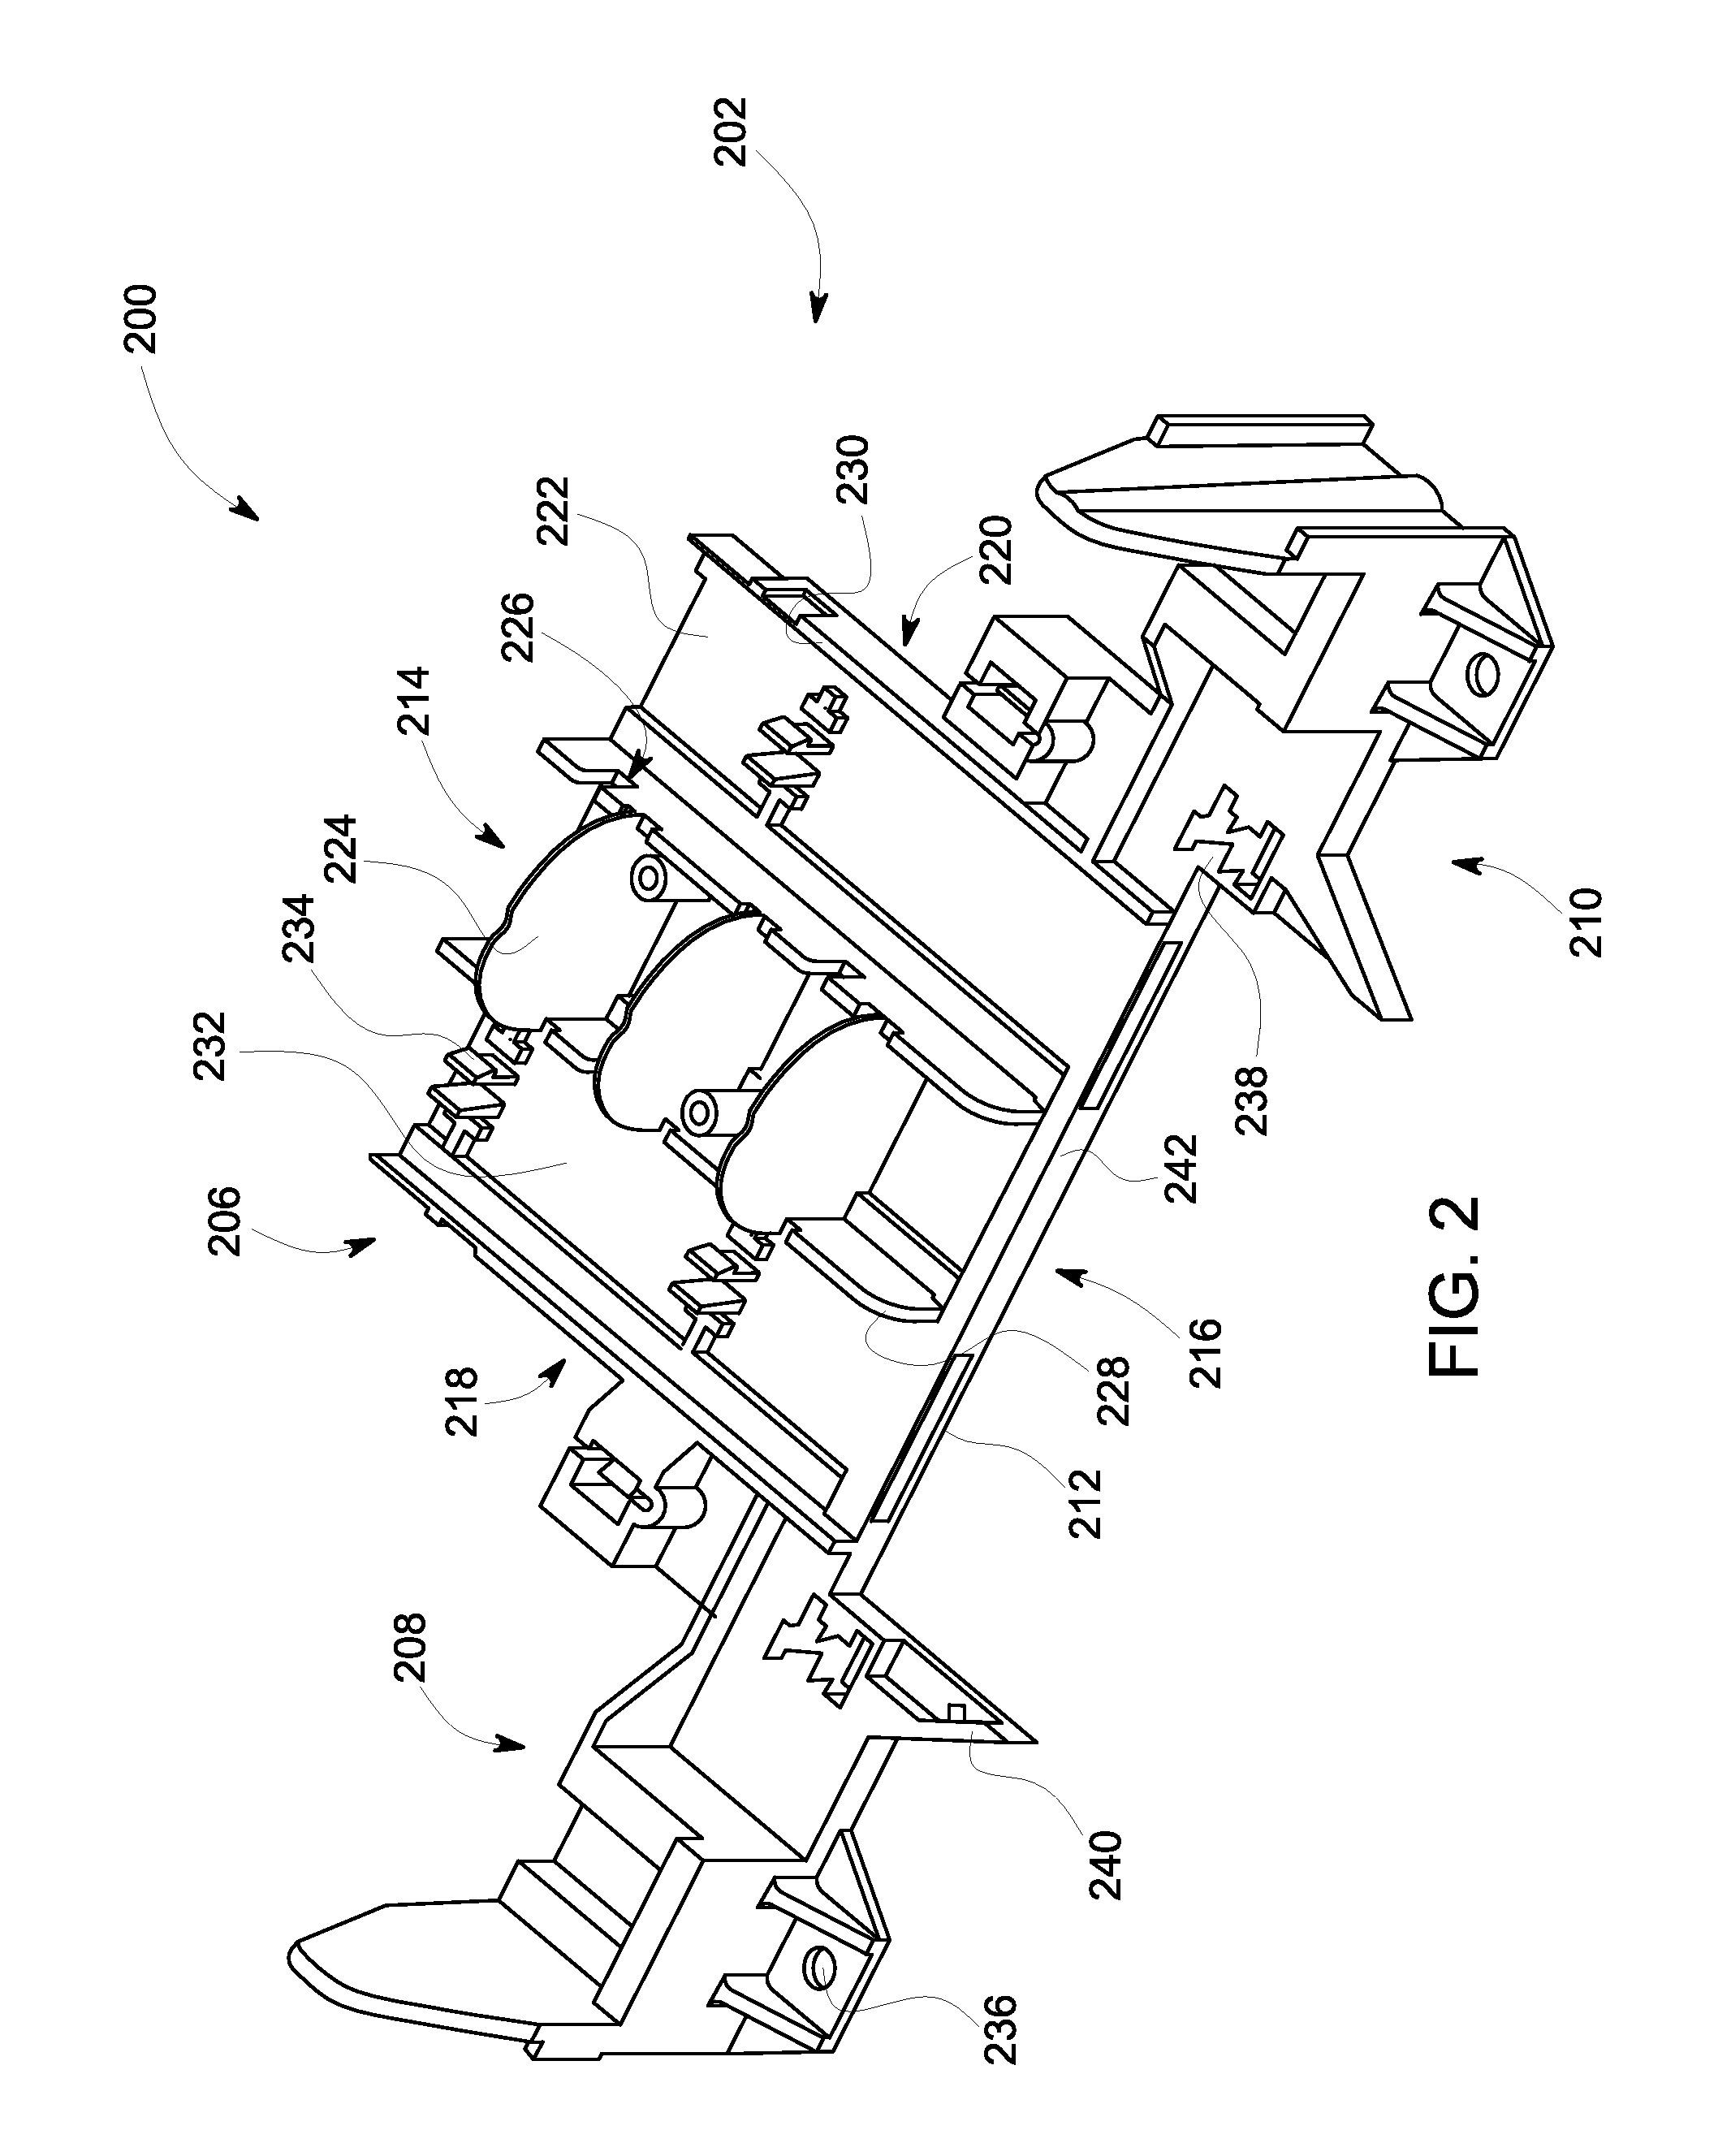 Heat transfer apparatus for use with electrical devices